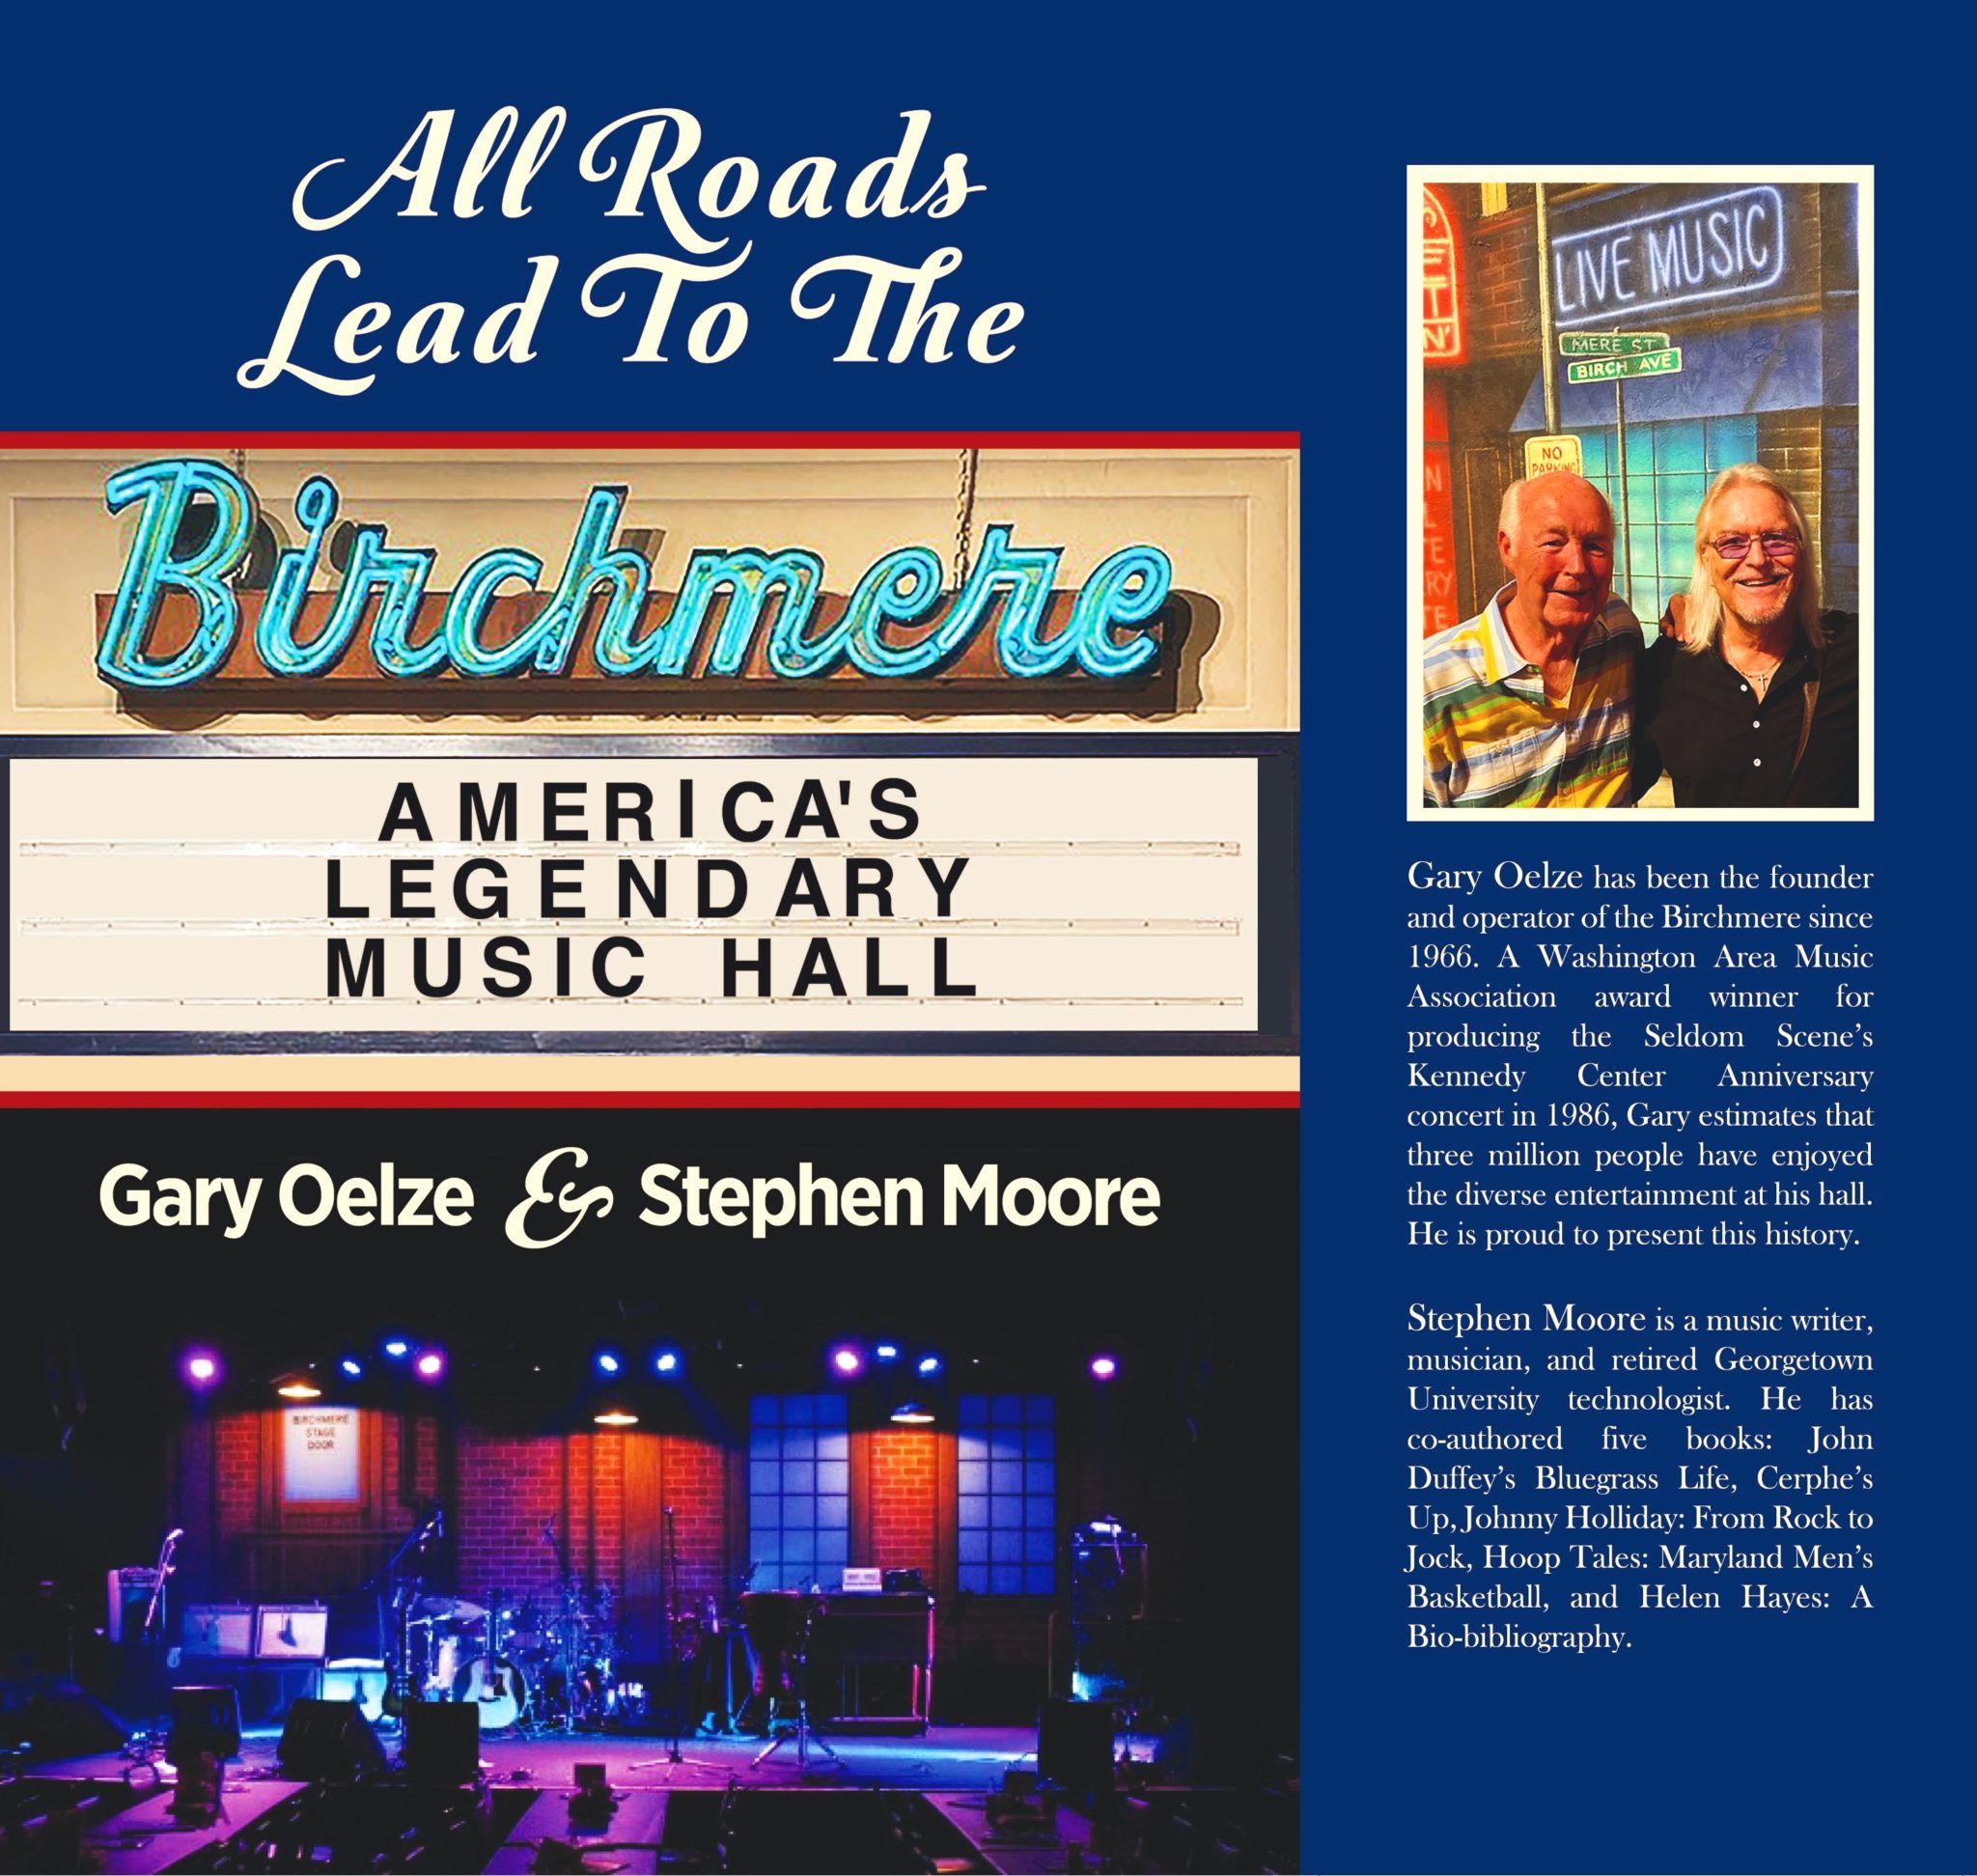 Book cover and jacket for "All Roads Lead To The Birchmere" (Image: Steve Houk)